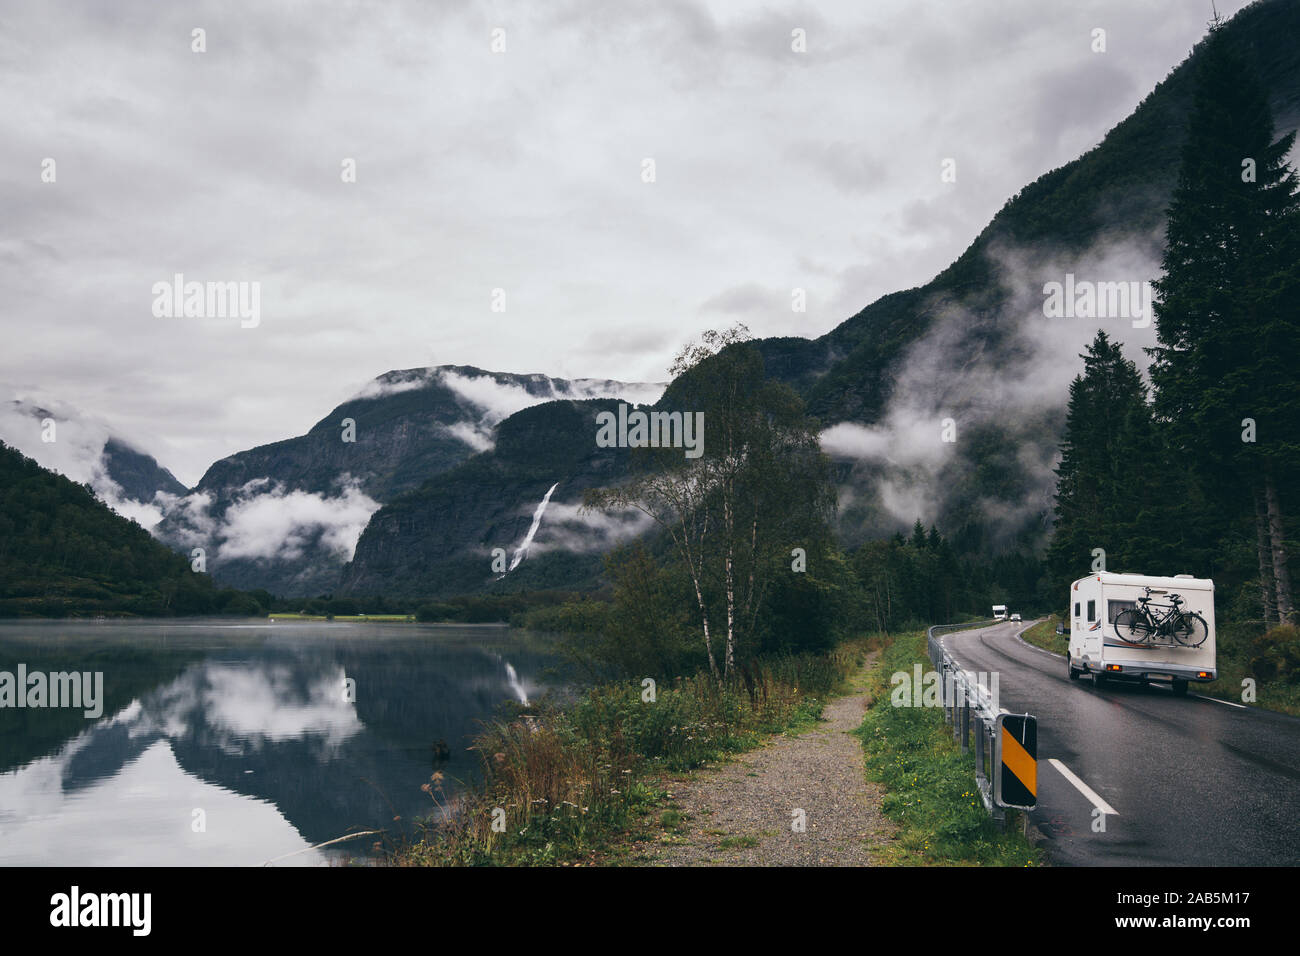 Campervan driving along Geiranger fjord in Norway, mountain reflection in water. Stock Photo